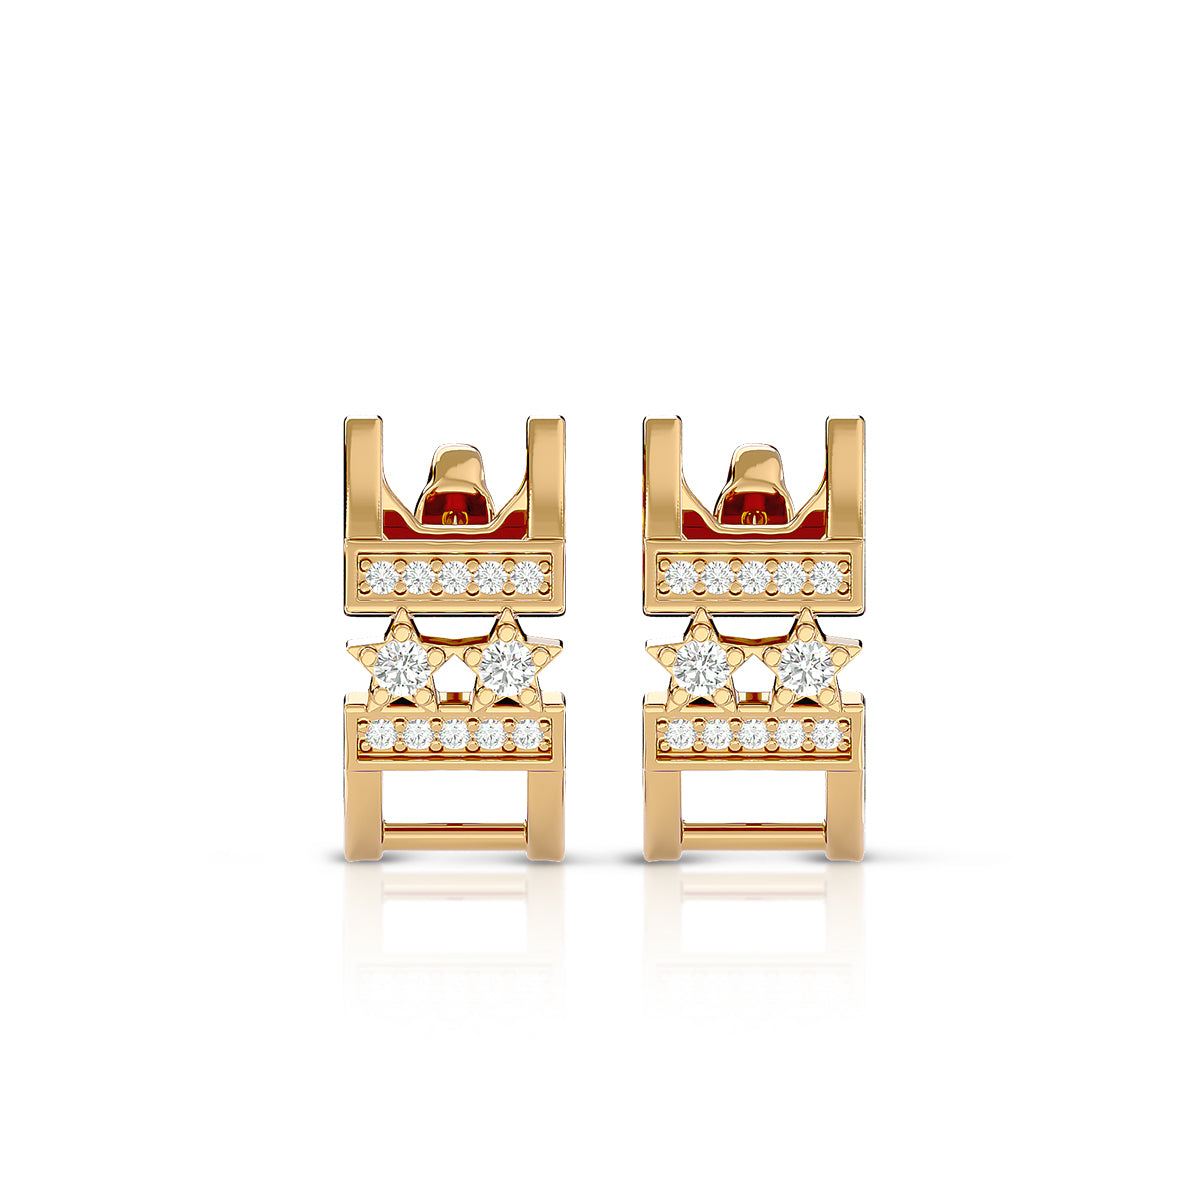 Empowerment Earrings 18K Gold With Diamonds